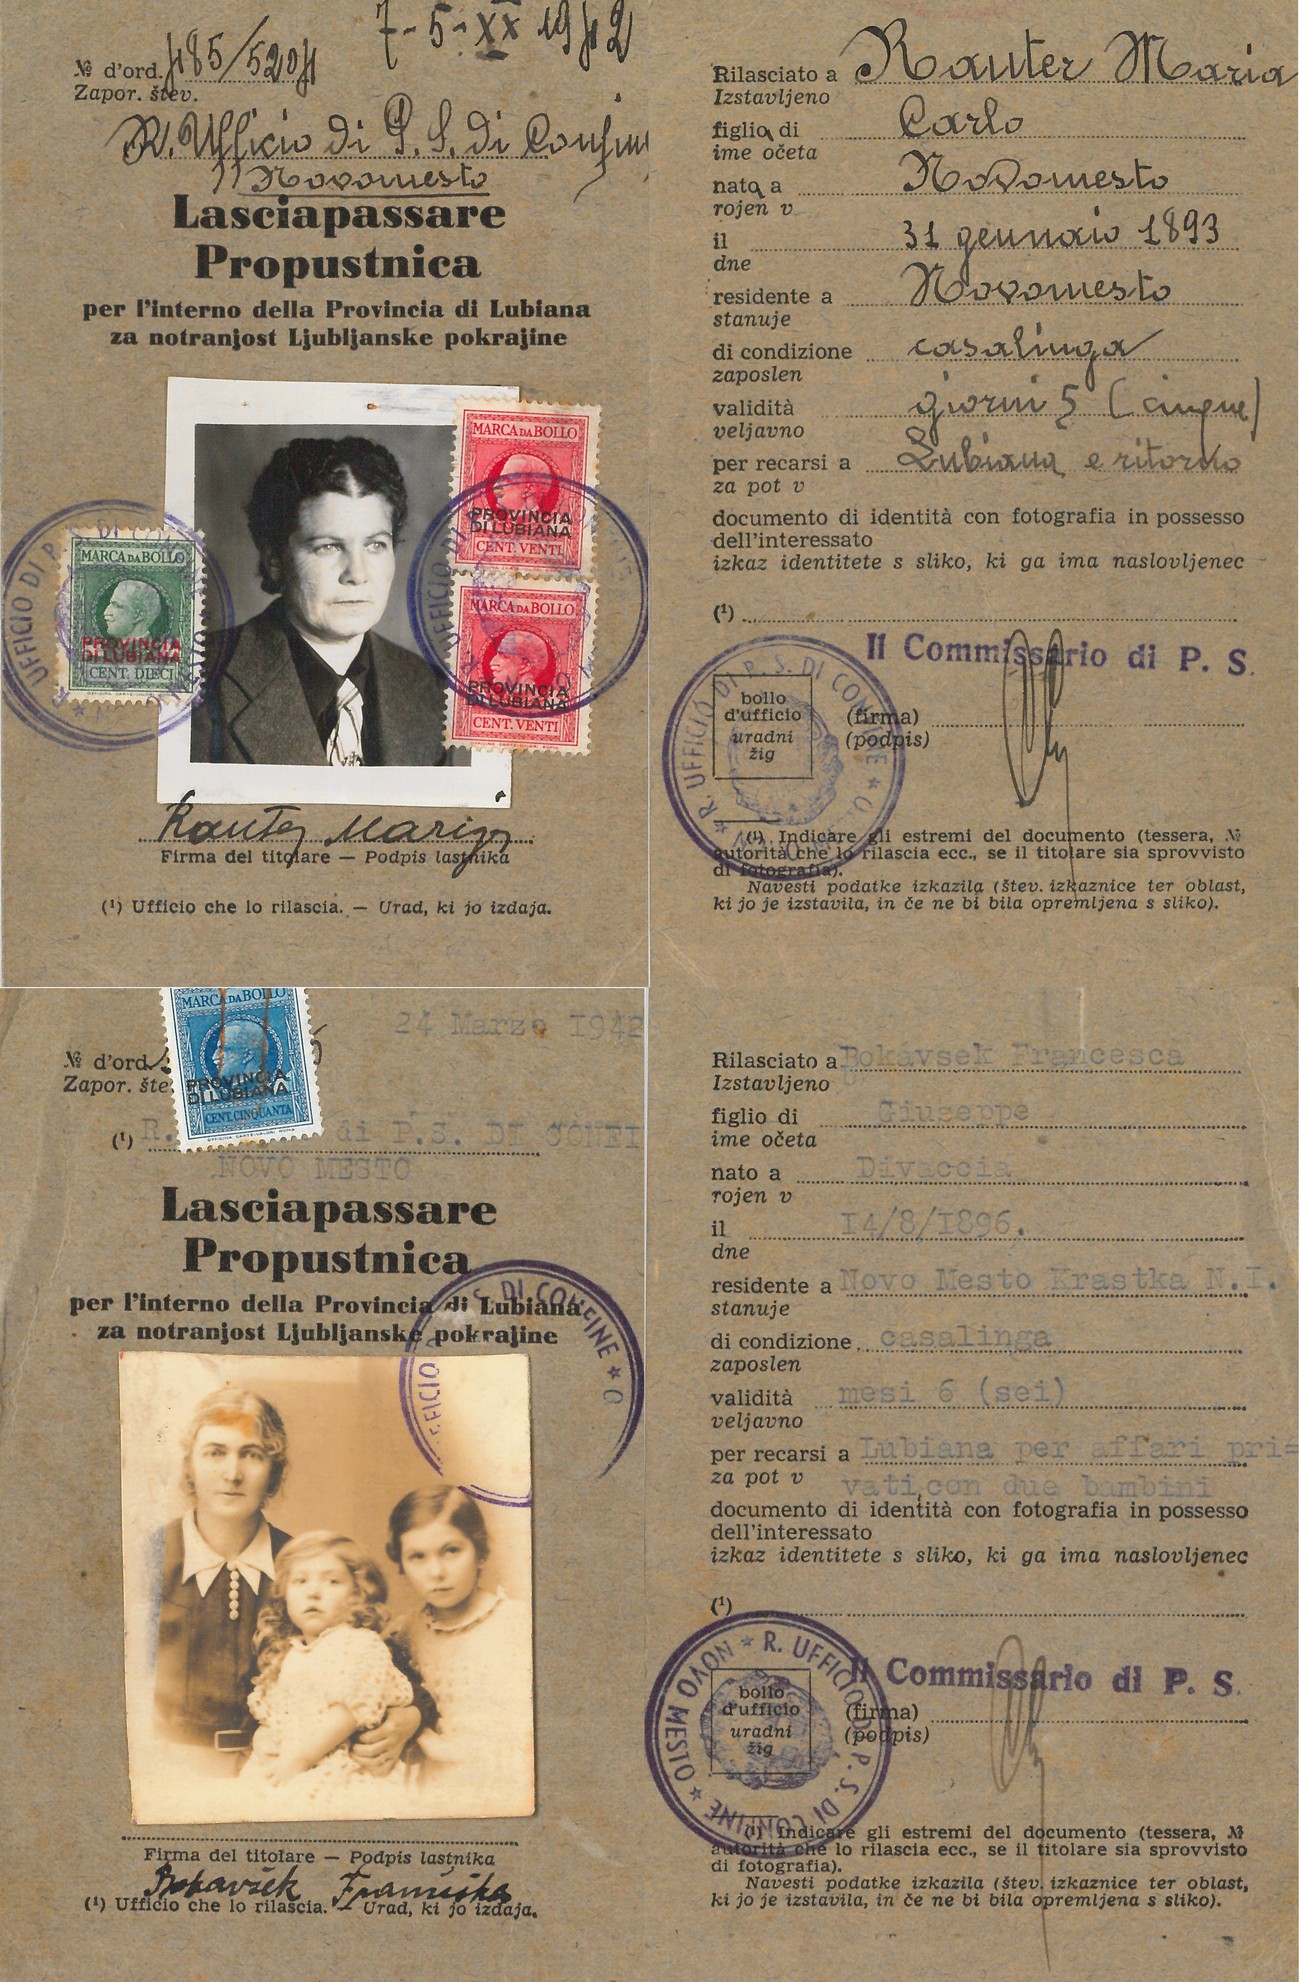 Travels within the Province of Ljubljana were also made very difficult, as special passes were required. Both passes shown above were required for travelling from Novo mesto to Ljubljana. The first was valid only for five days, while the other was valid for six months. The second one was issued to a mother with two children. Zgodovinski arhiv Ljubljana, Enota za Dolenjsko in Belo krajino Novo mesto.